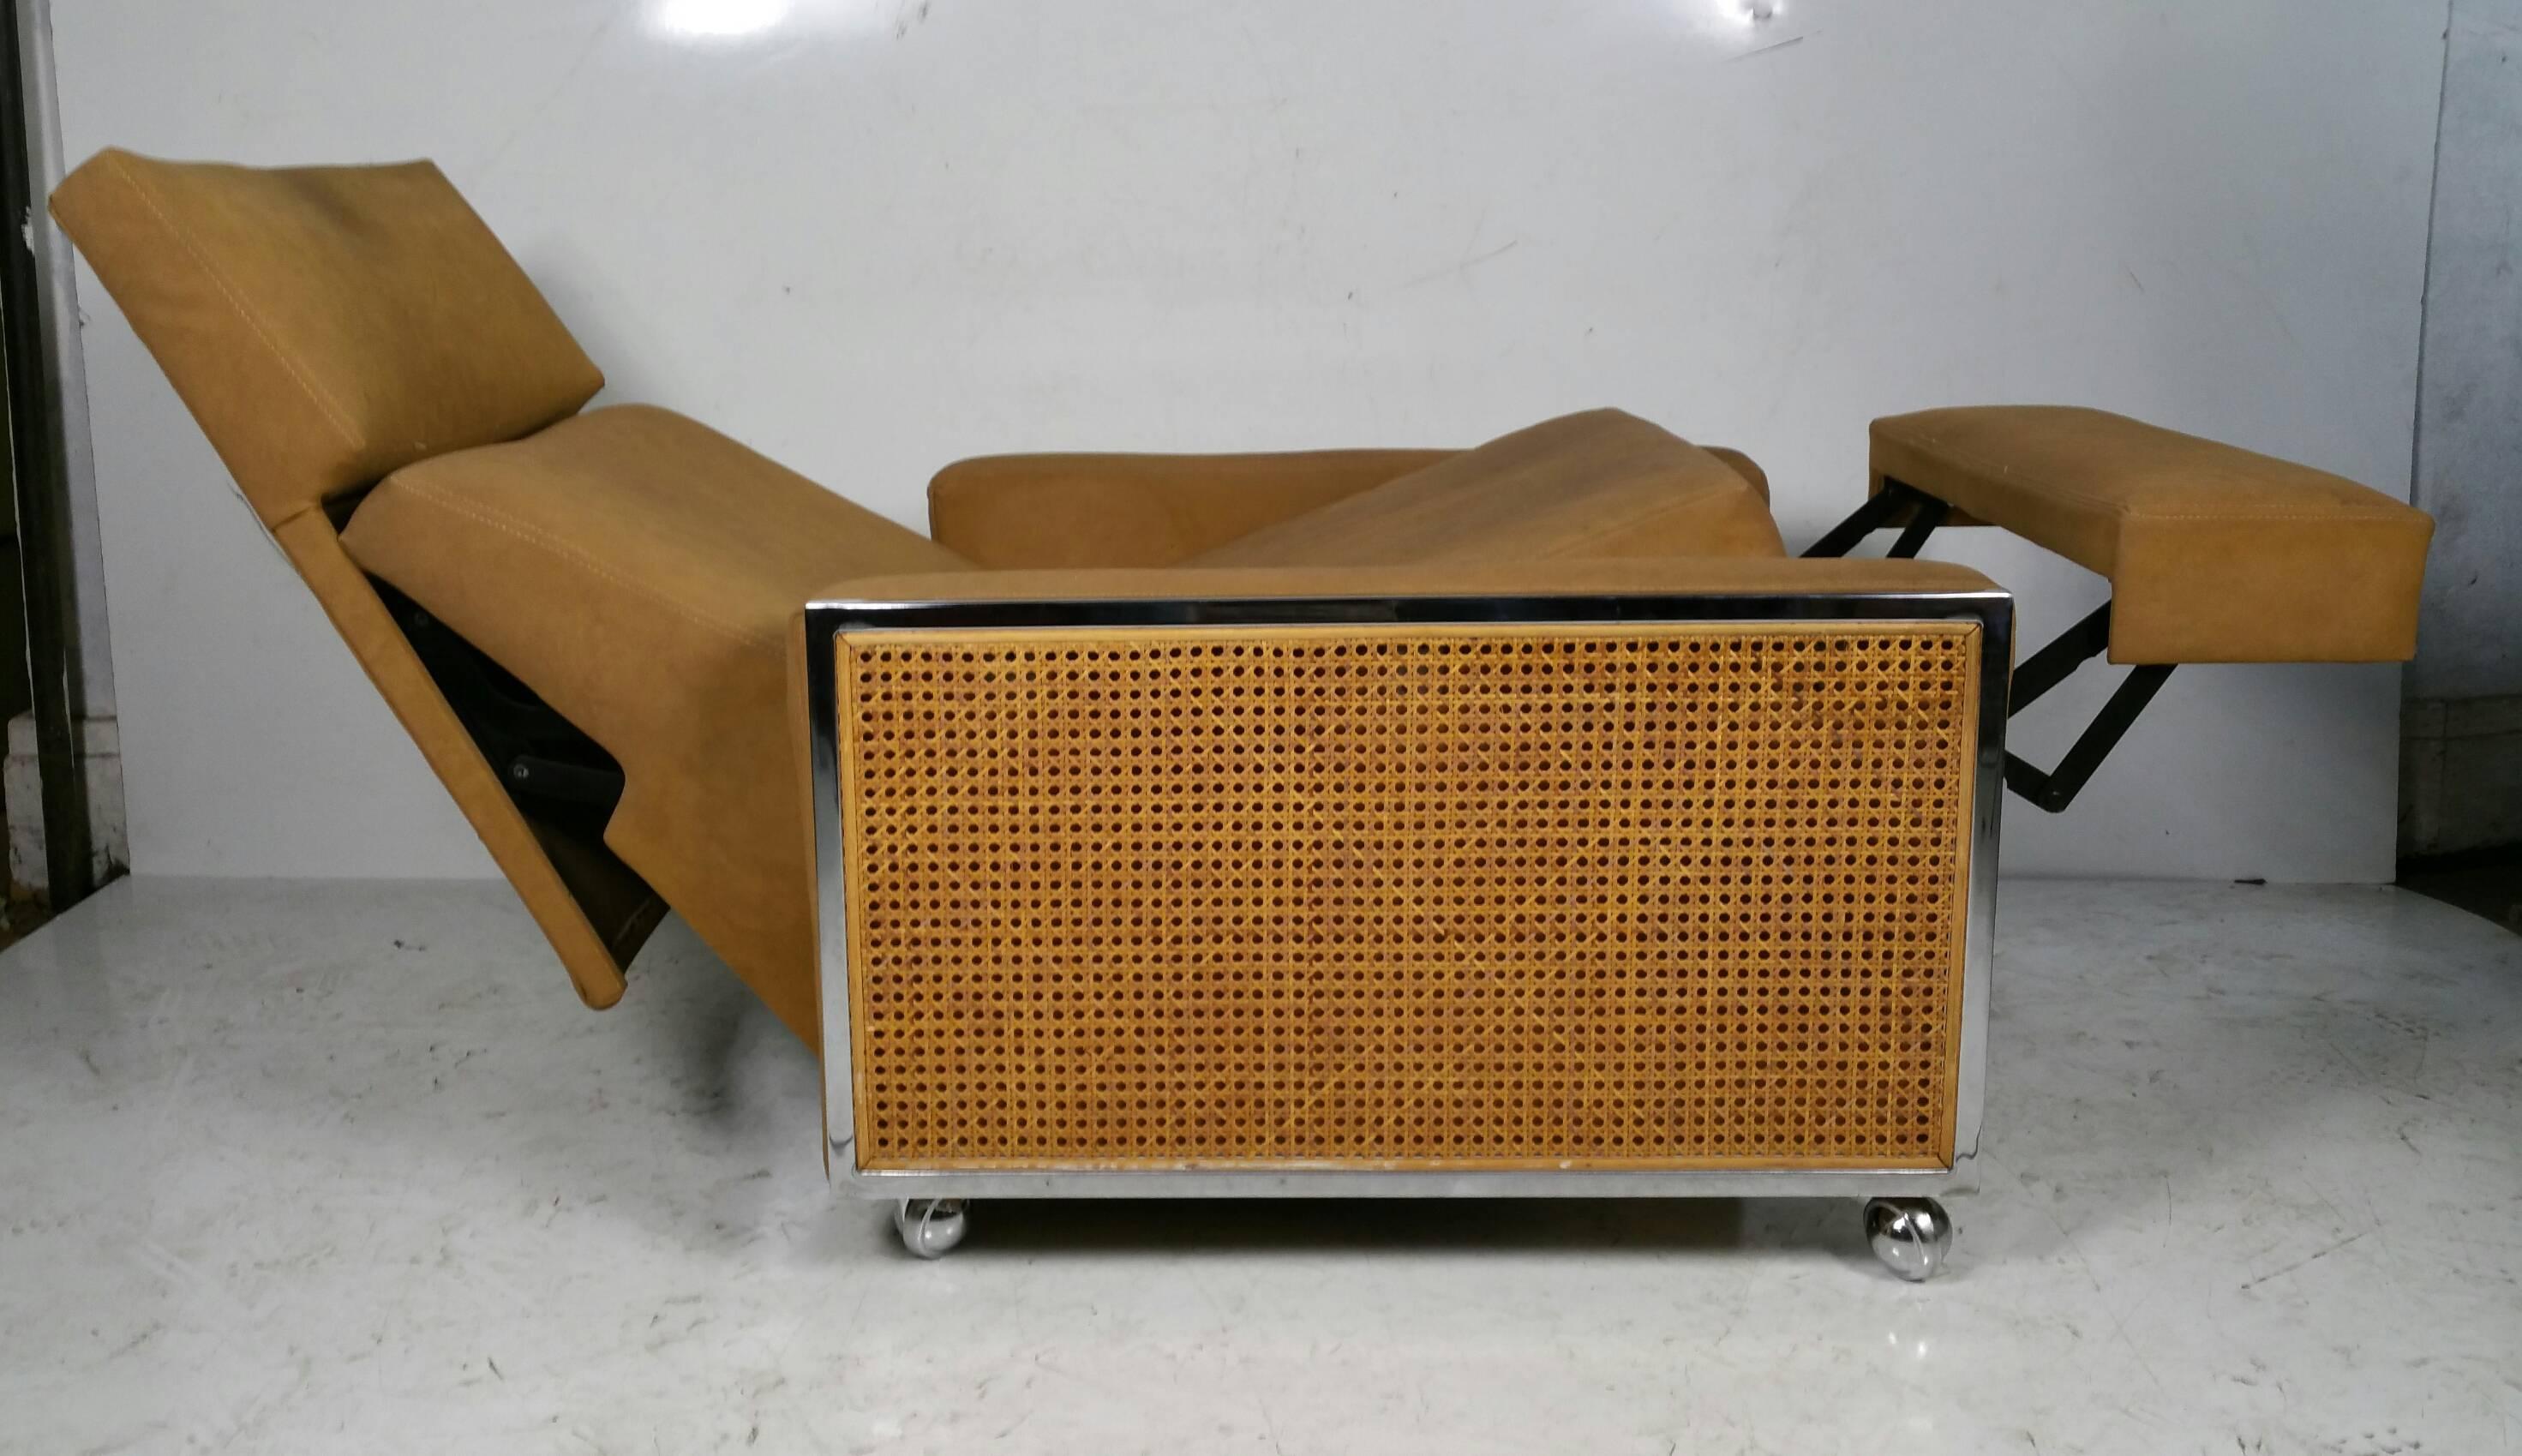 North American Modernist Three Position Reclining Chair by Milo Baughman